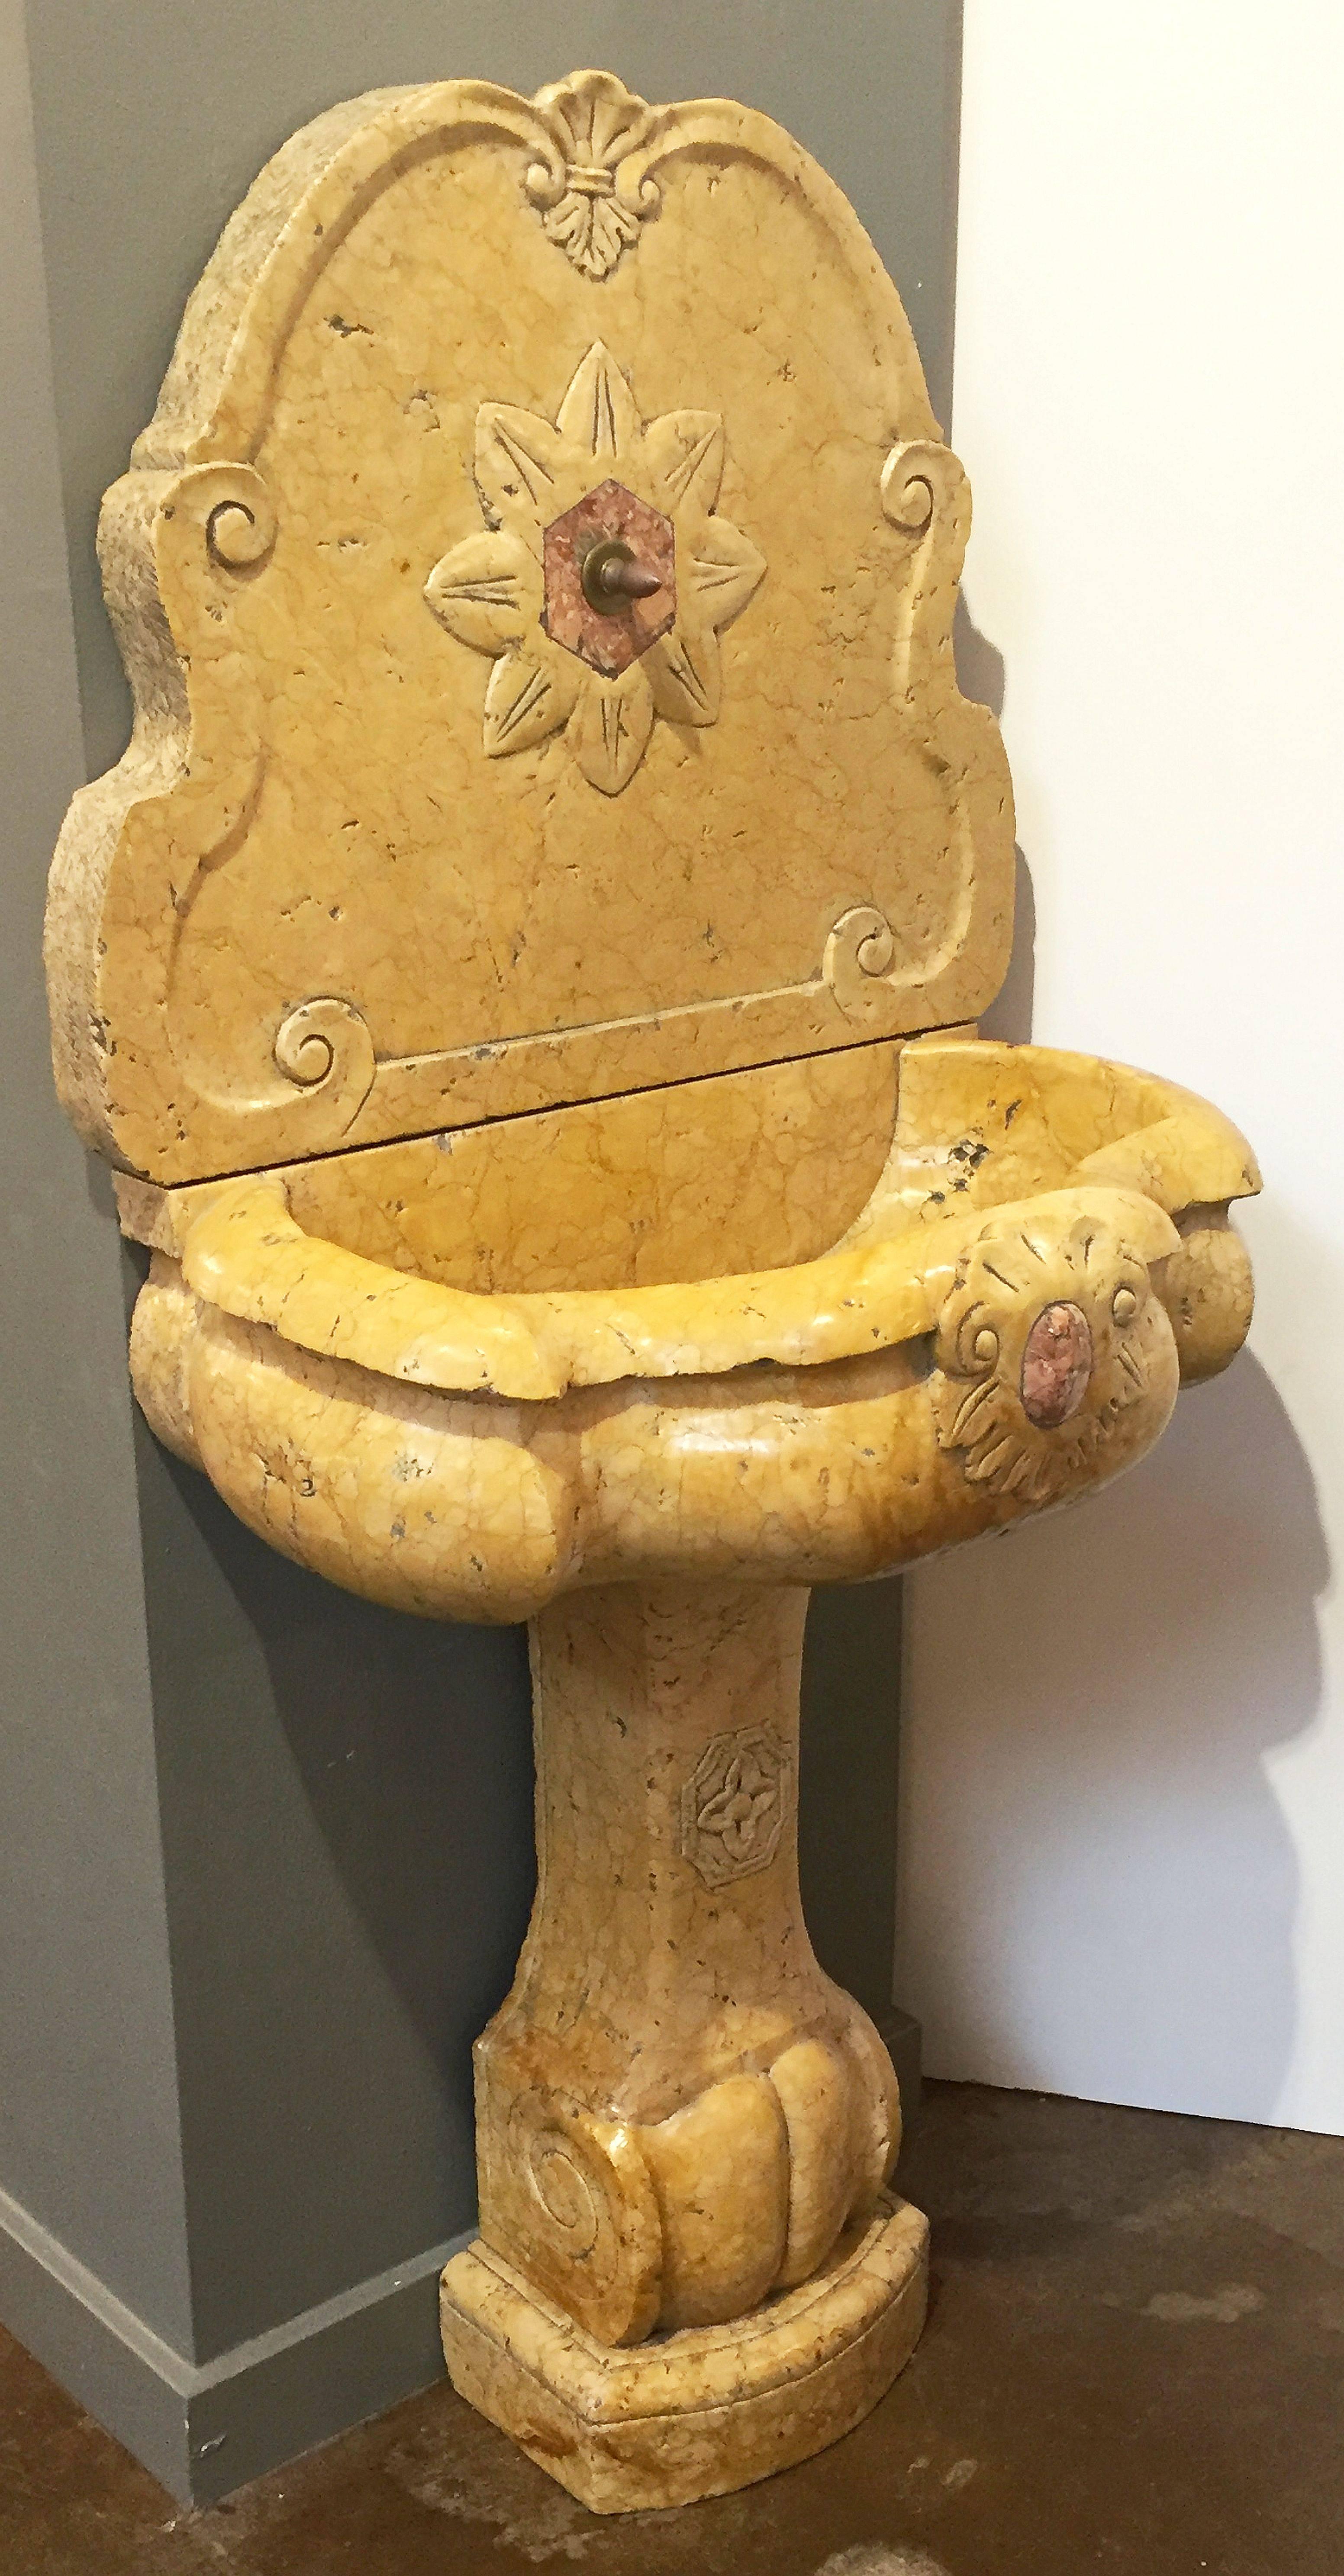 A fine Italian standing wall fountain for outdoors or indoors, in three parts - back, basin, and stand - of carved siena marble. Back has hole for mounting fountain-head and basin has hole for drainage.